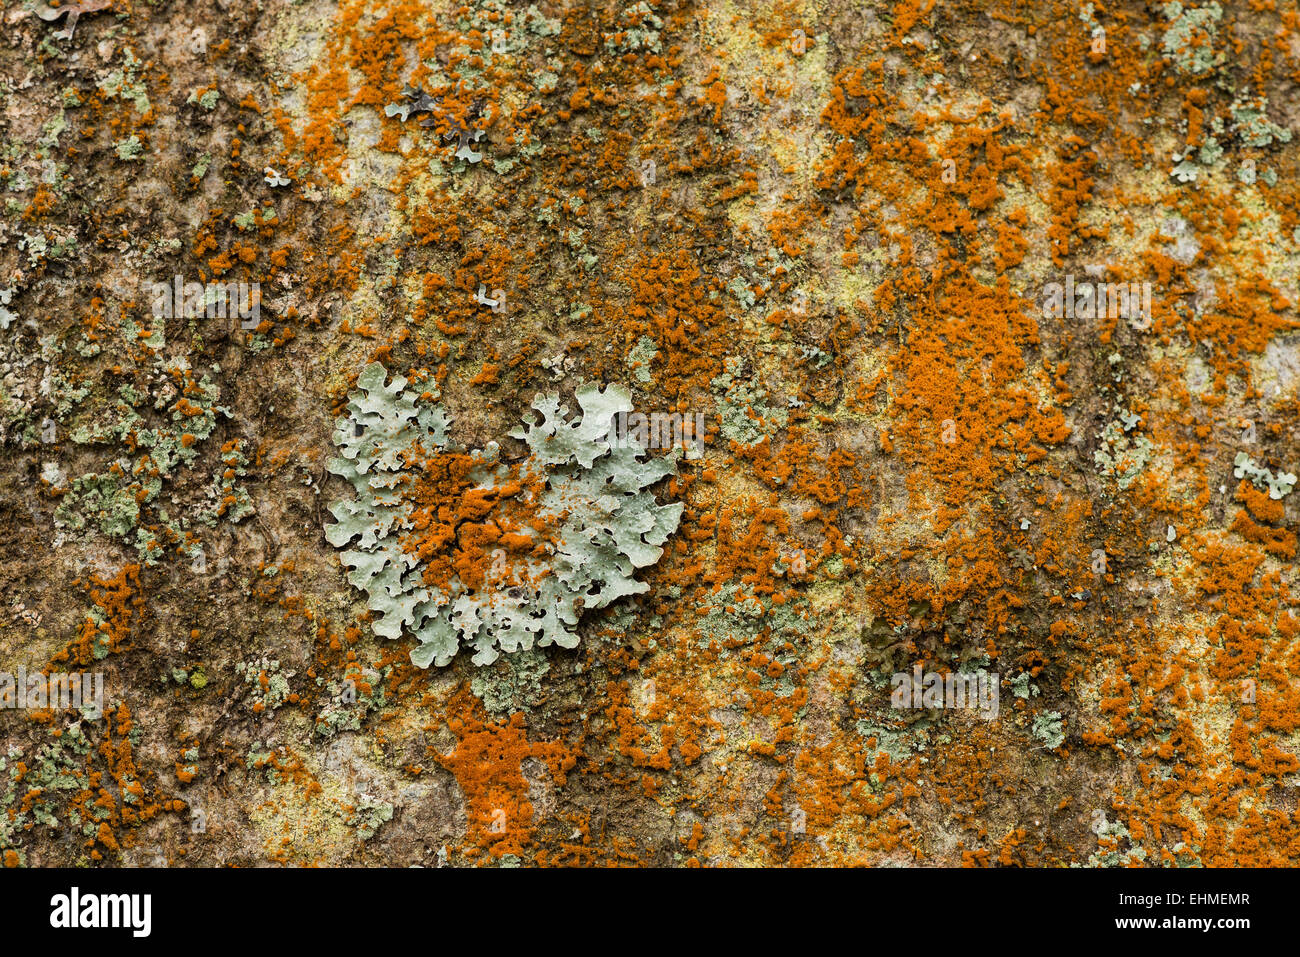 bright orange alga Trentepohlia colonising the bark surface of an ash tree competing for space with starburst lichen Stock Photo